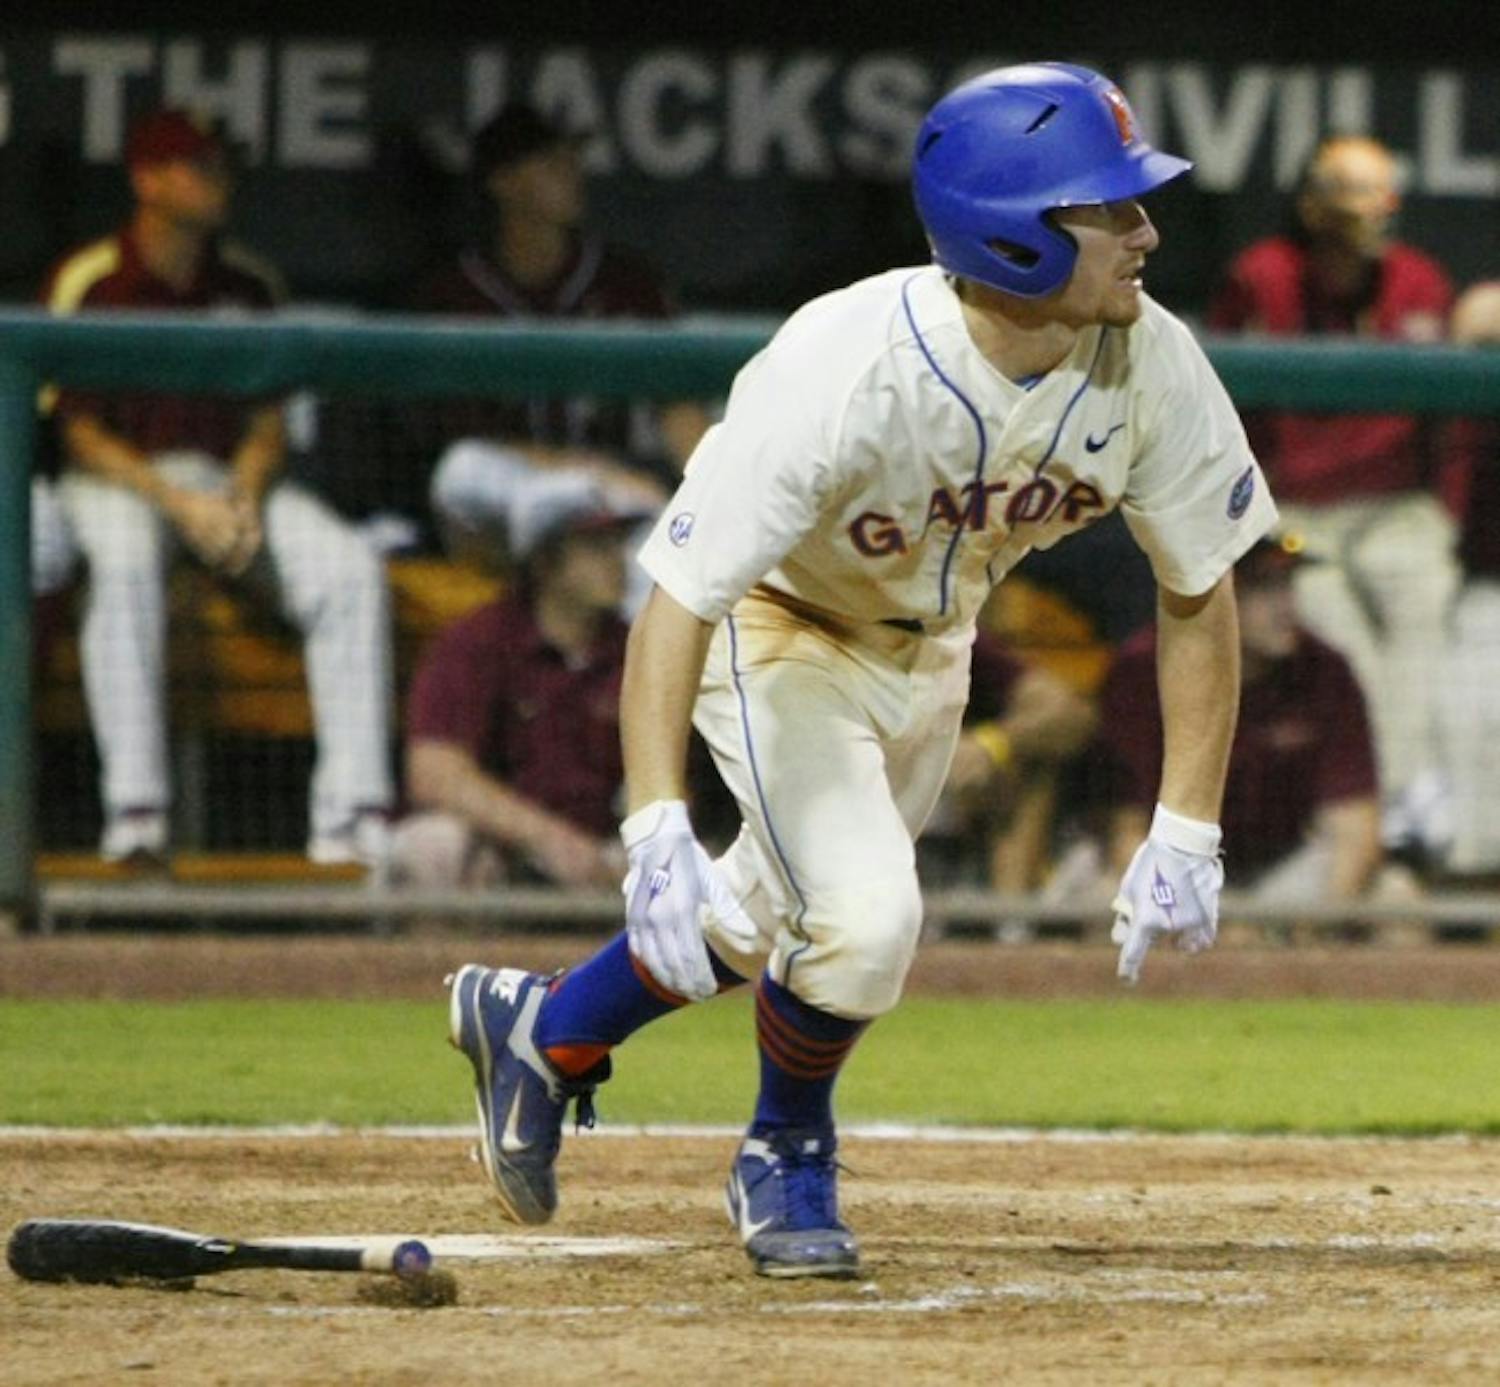 Florida freshman second baseman Casey Turgeon watches as his sixth-inning triple soars toward center fielder James Ramsey. Turgeon’s two RBI on the hit proved to be the winning runs in UF’s 4-1 victory against FSU.